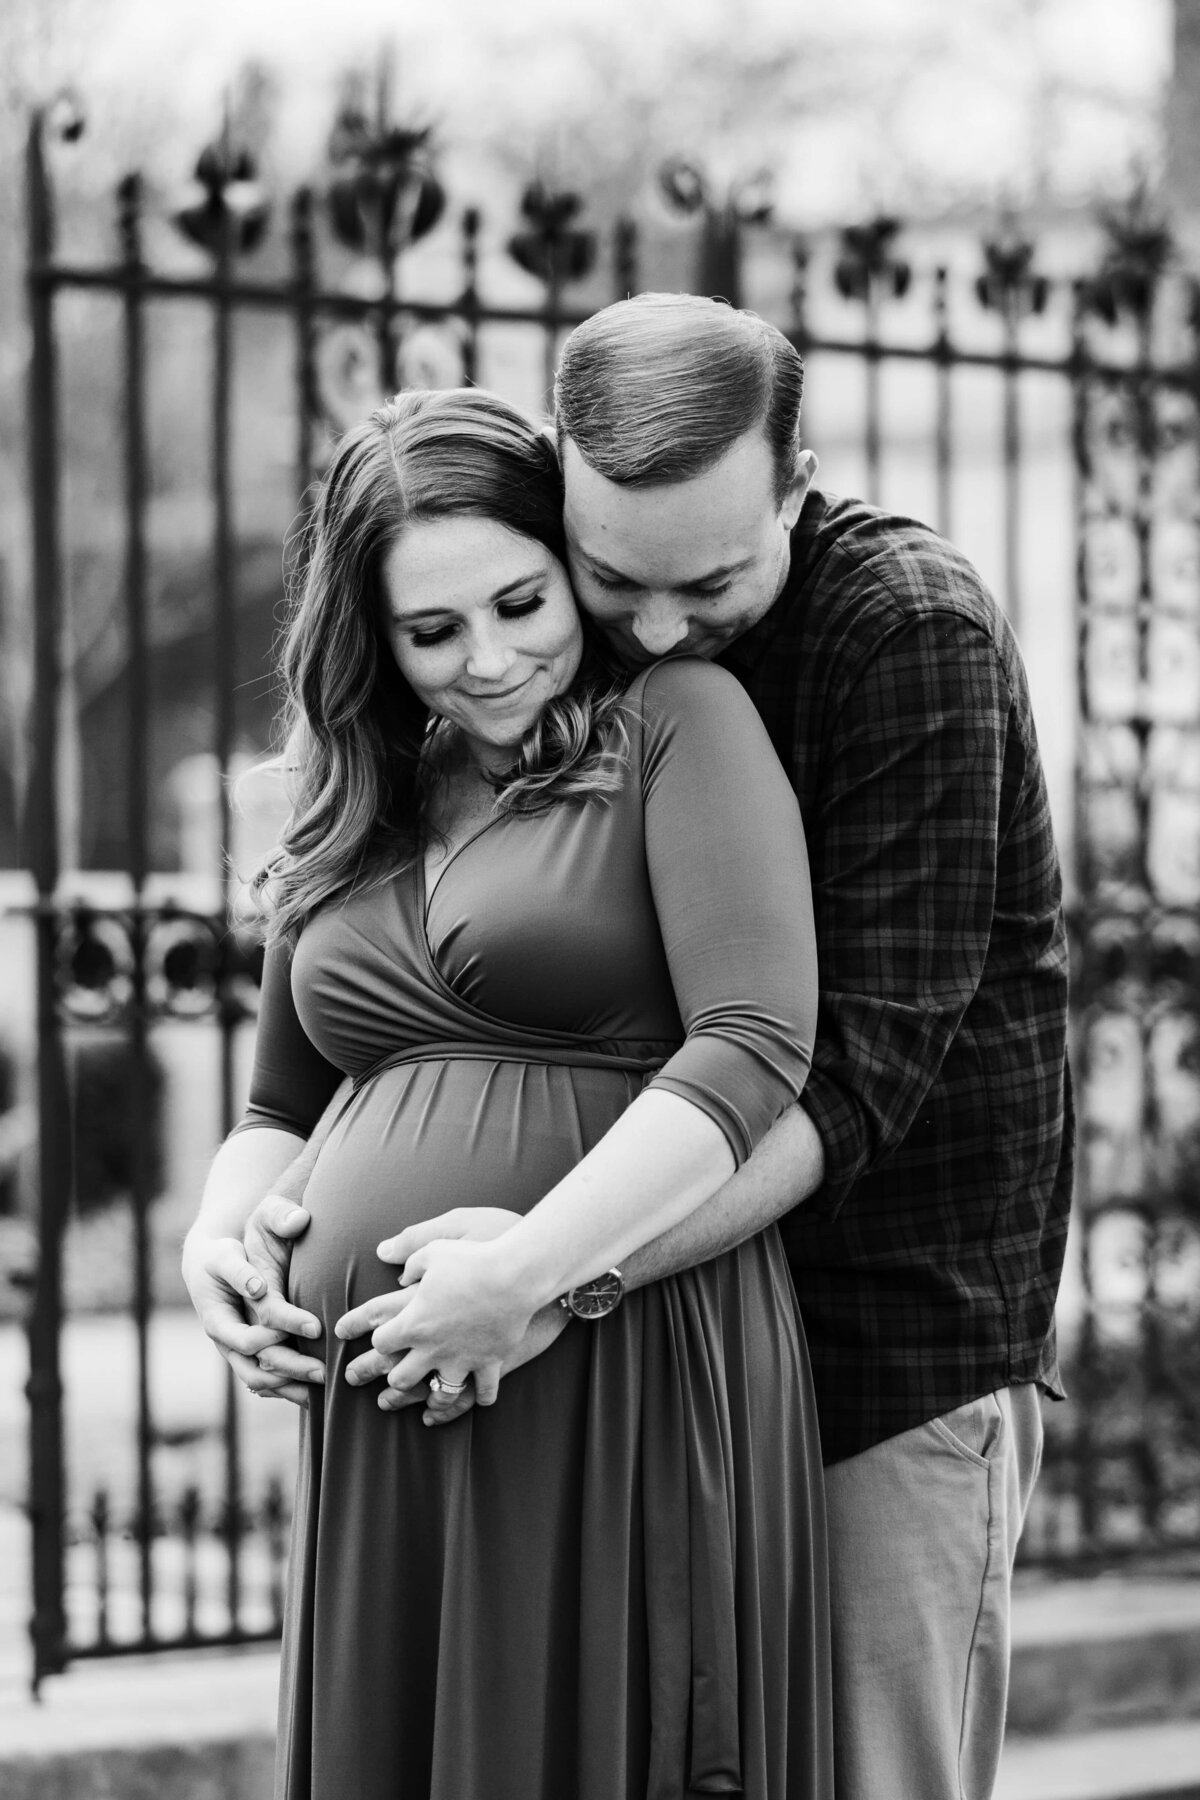 A couple sharing an intimate moment during their maternity photography session, with the man embracing the pregnant woman from behind.